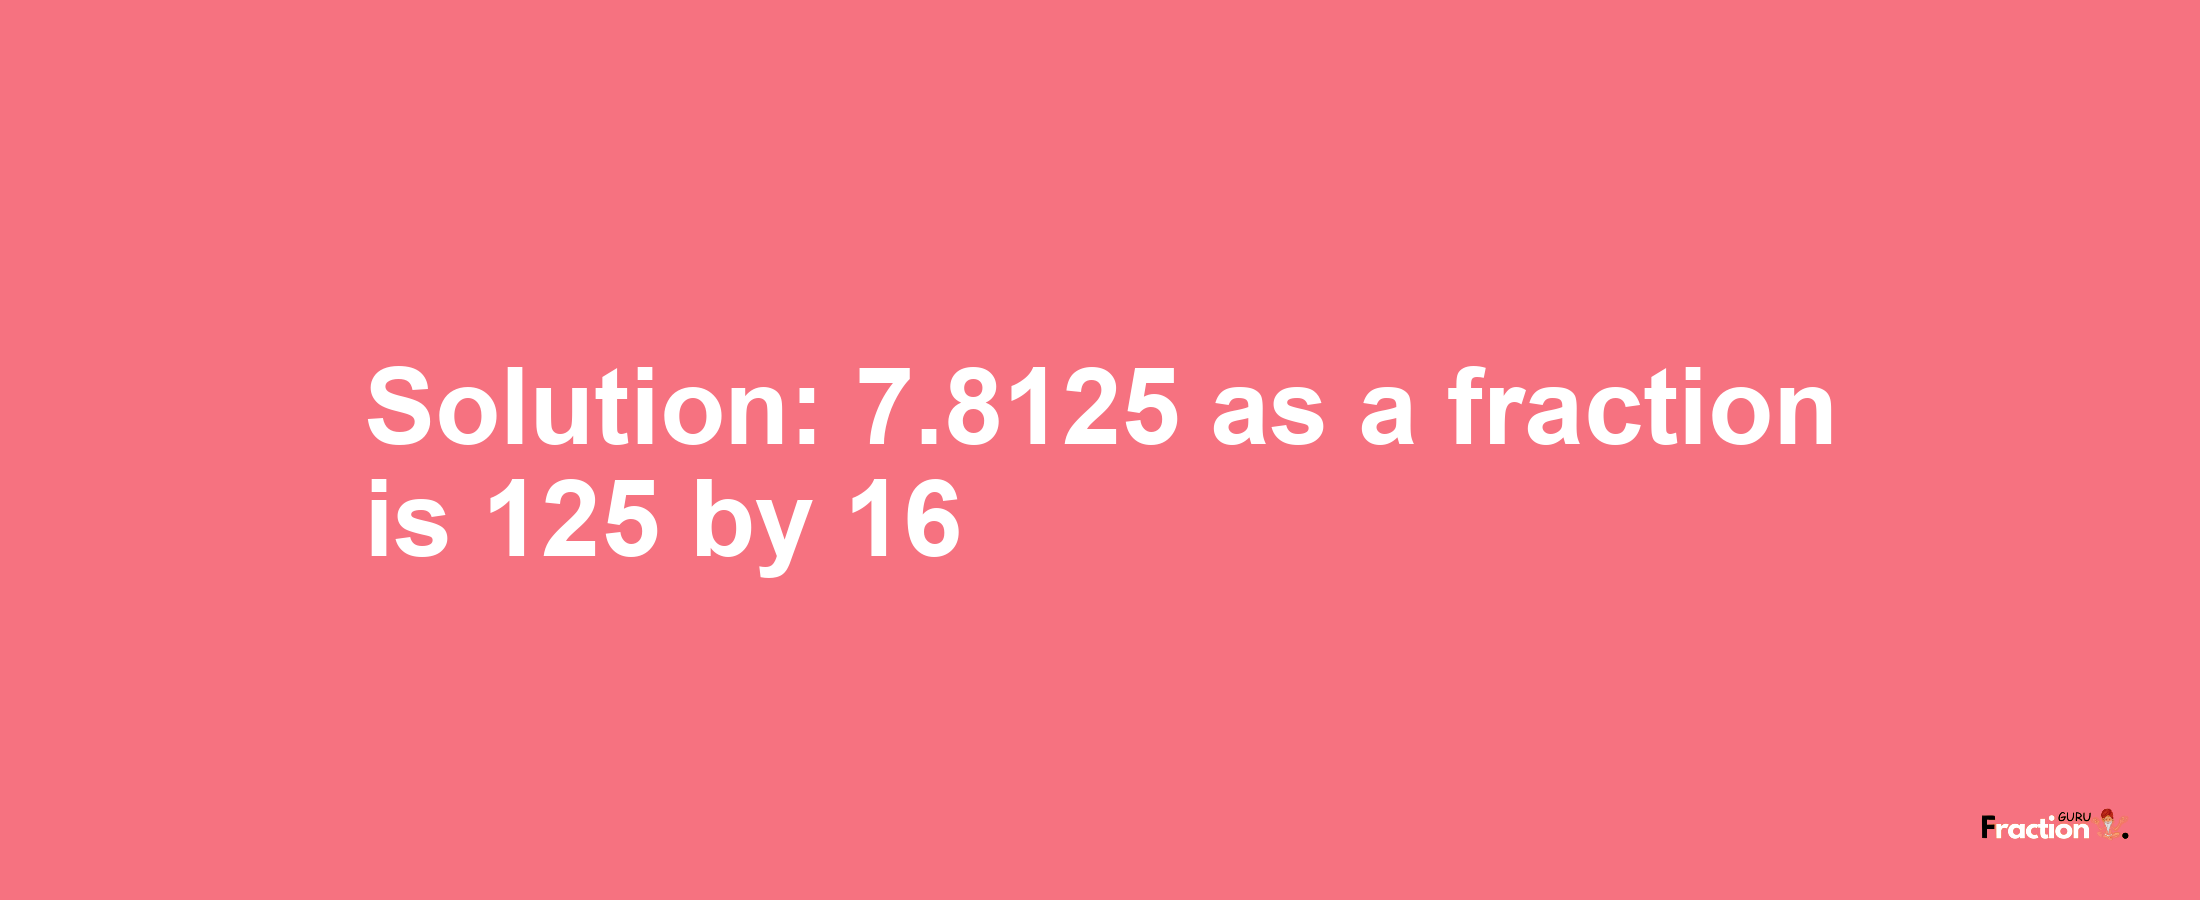 Solution:7.8125 as a fraction is 125/16